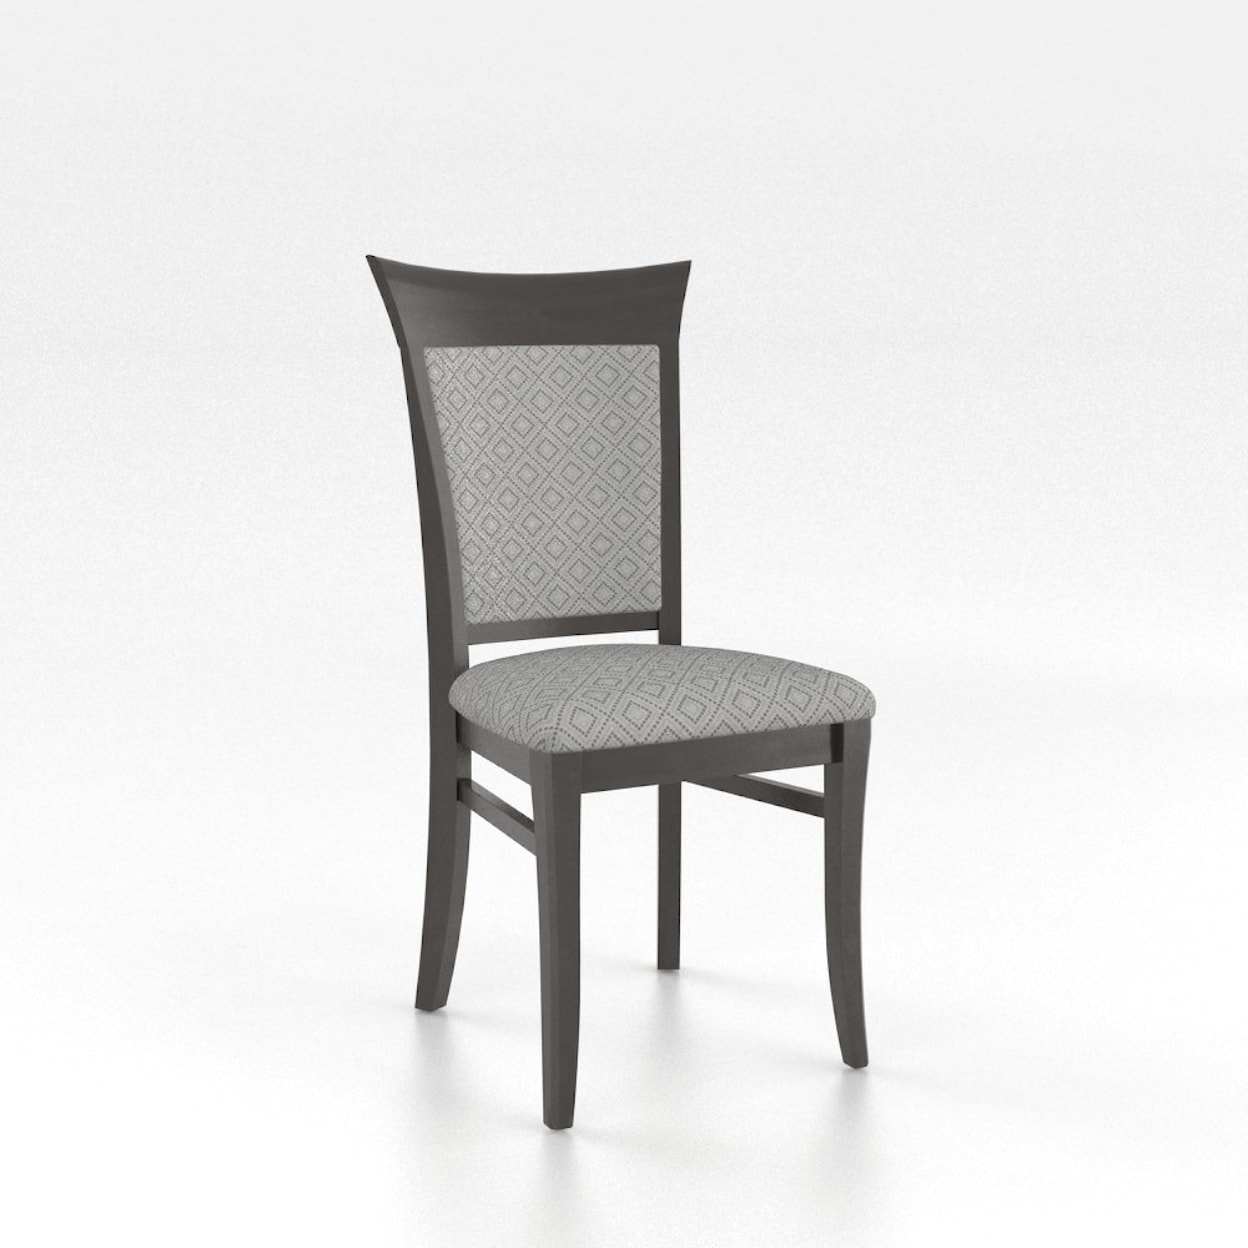 Canadel Canadel Customizable Upholstered Side Chair